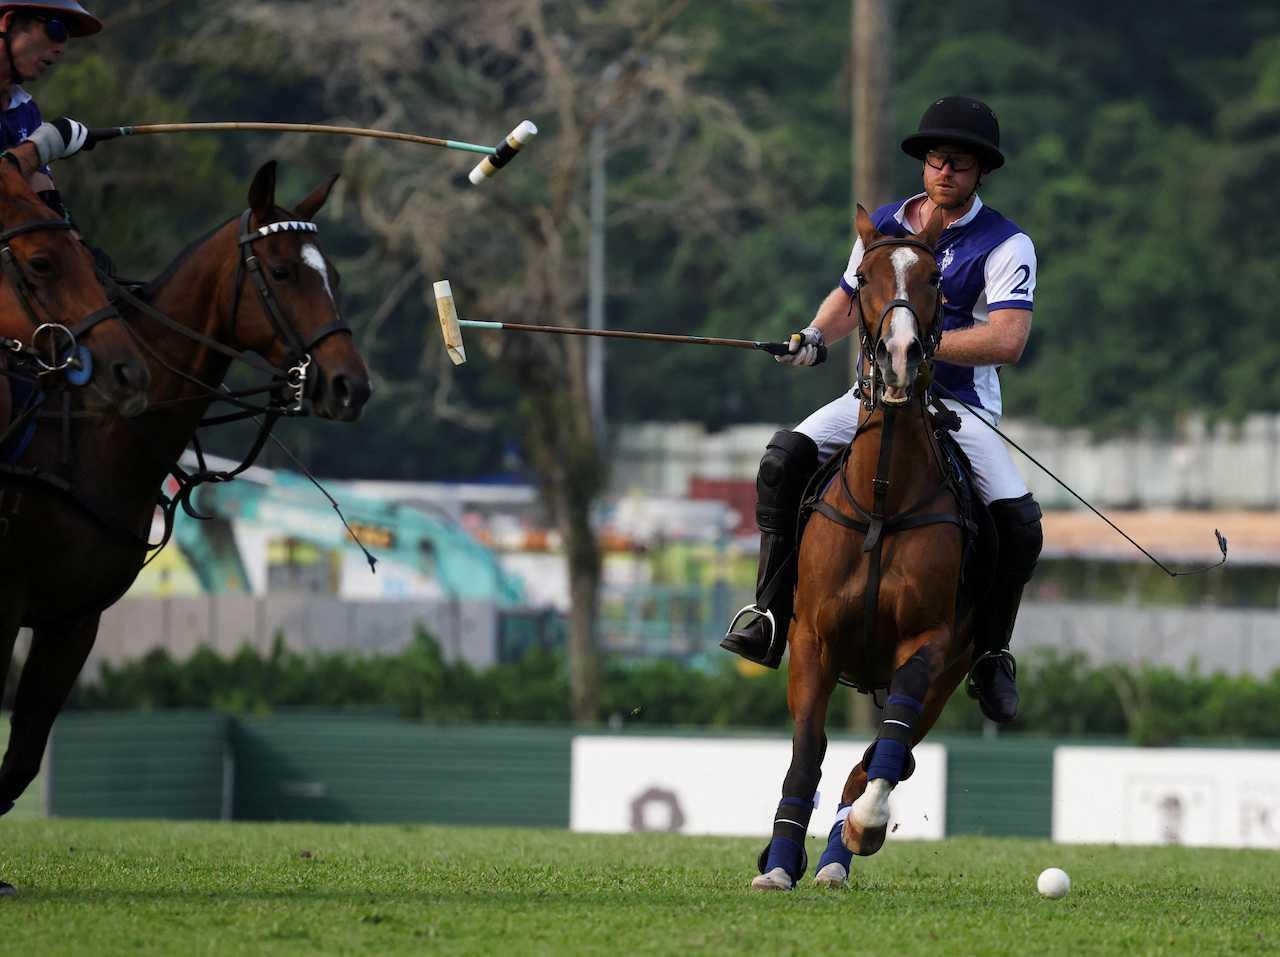 Britain’s Prince Harry, the Duke of Sussex, plays in the Sentebale ISPS Handa Polo Cup at the Singapore Polo Club in Singapore, Aug 12. Photo: Reuters